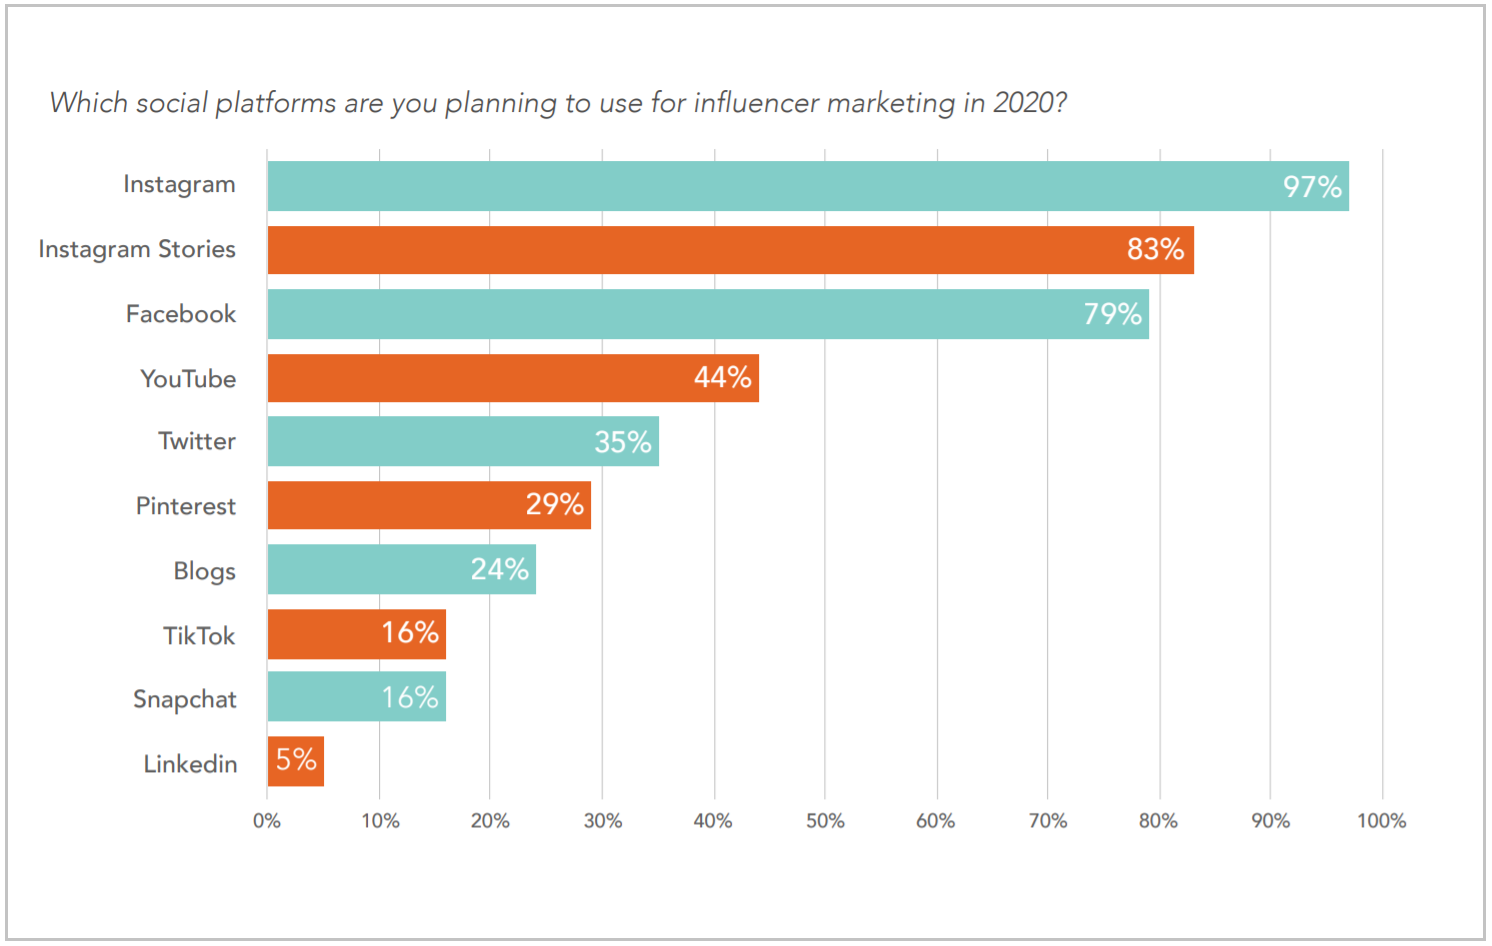 Which social media platforms are you planning to use for influencer marketing in 2020?